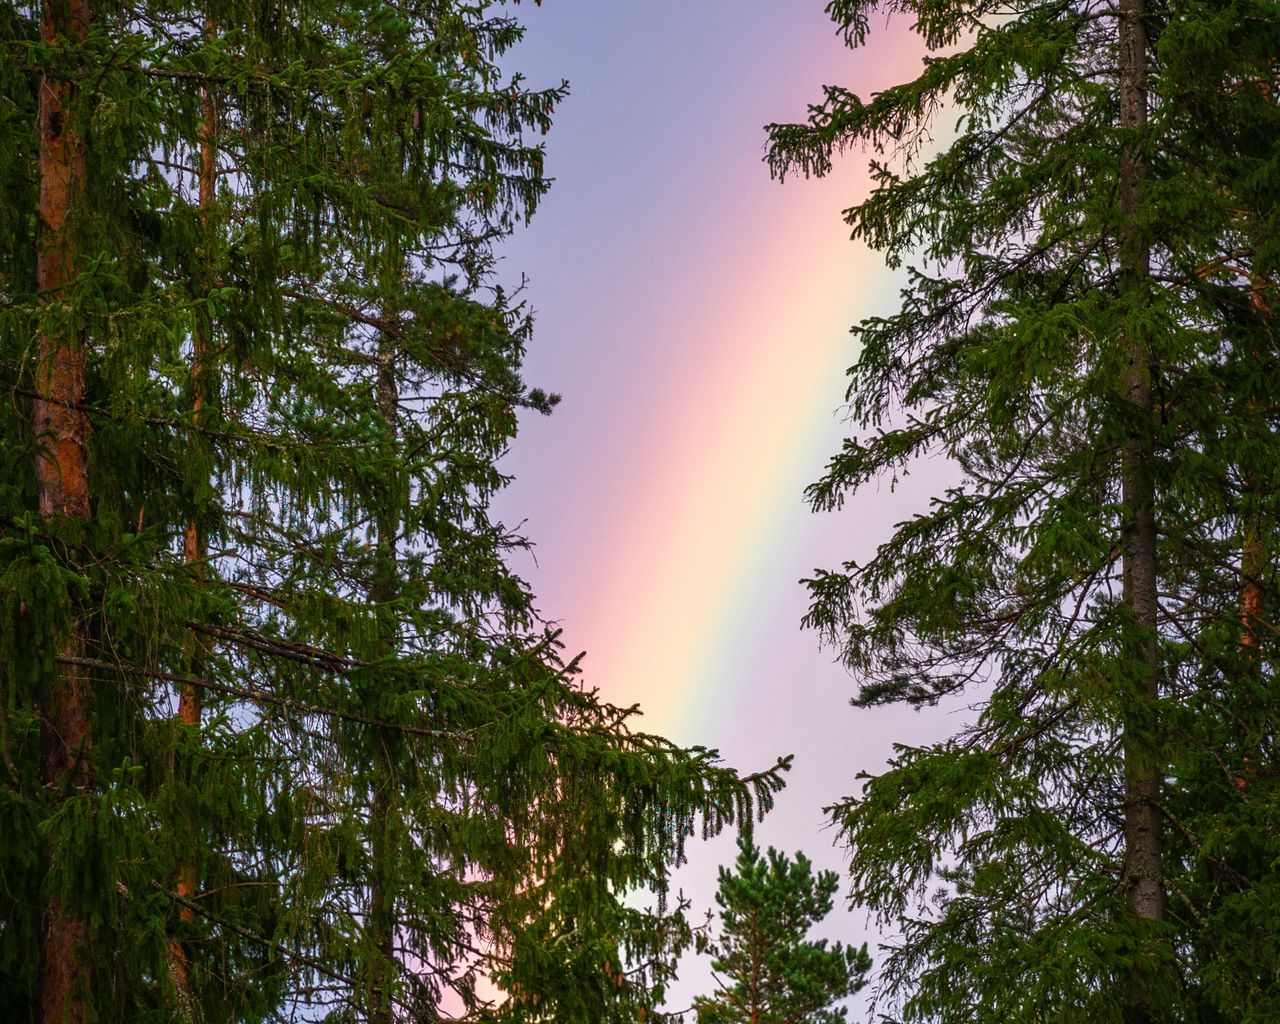 Download wallpaper 1280x1024 rainbow, trees, branches, sky, natural phenomenon, after the rain standard 5:4 HD background